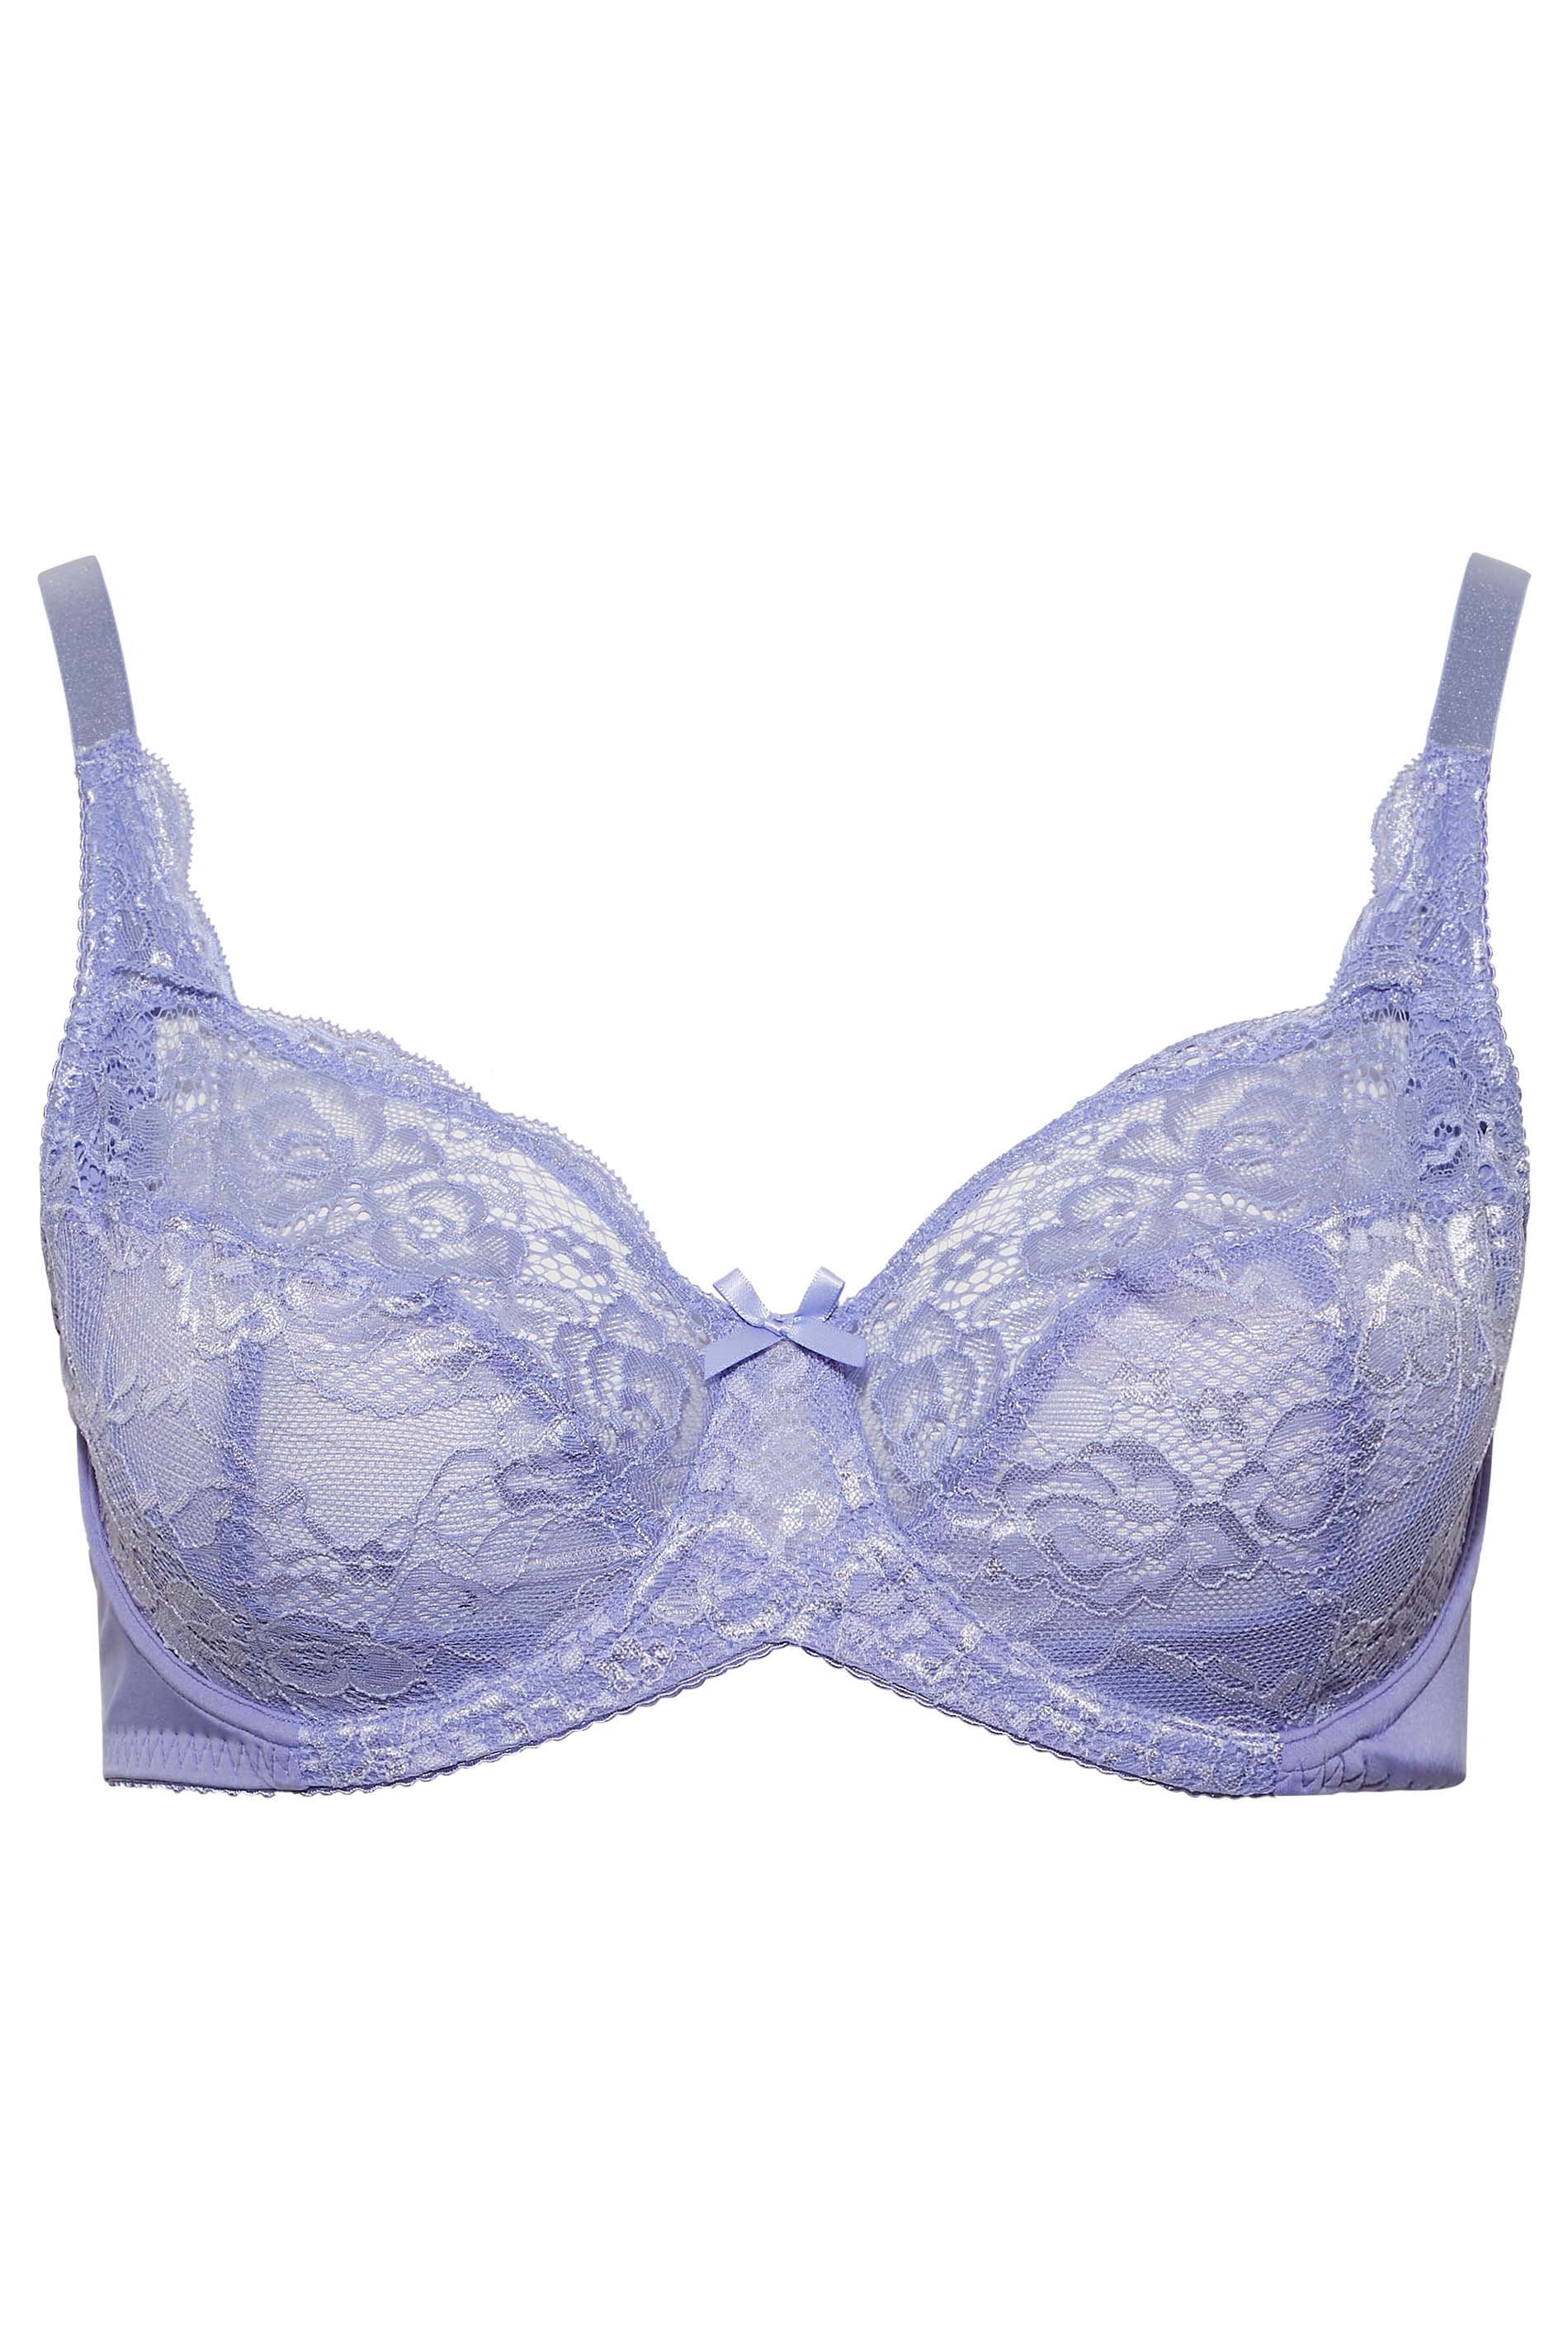 Plus Size Lavender Purple Stretch Lace Non-Padded Underwired Balcony Bra